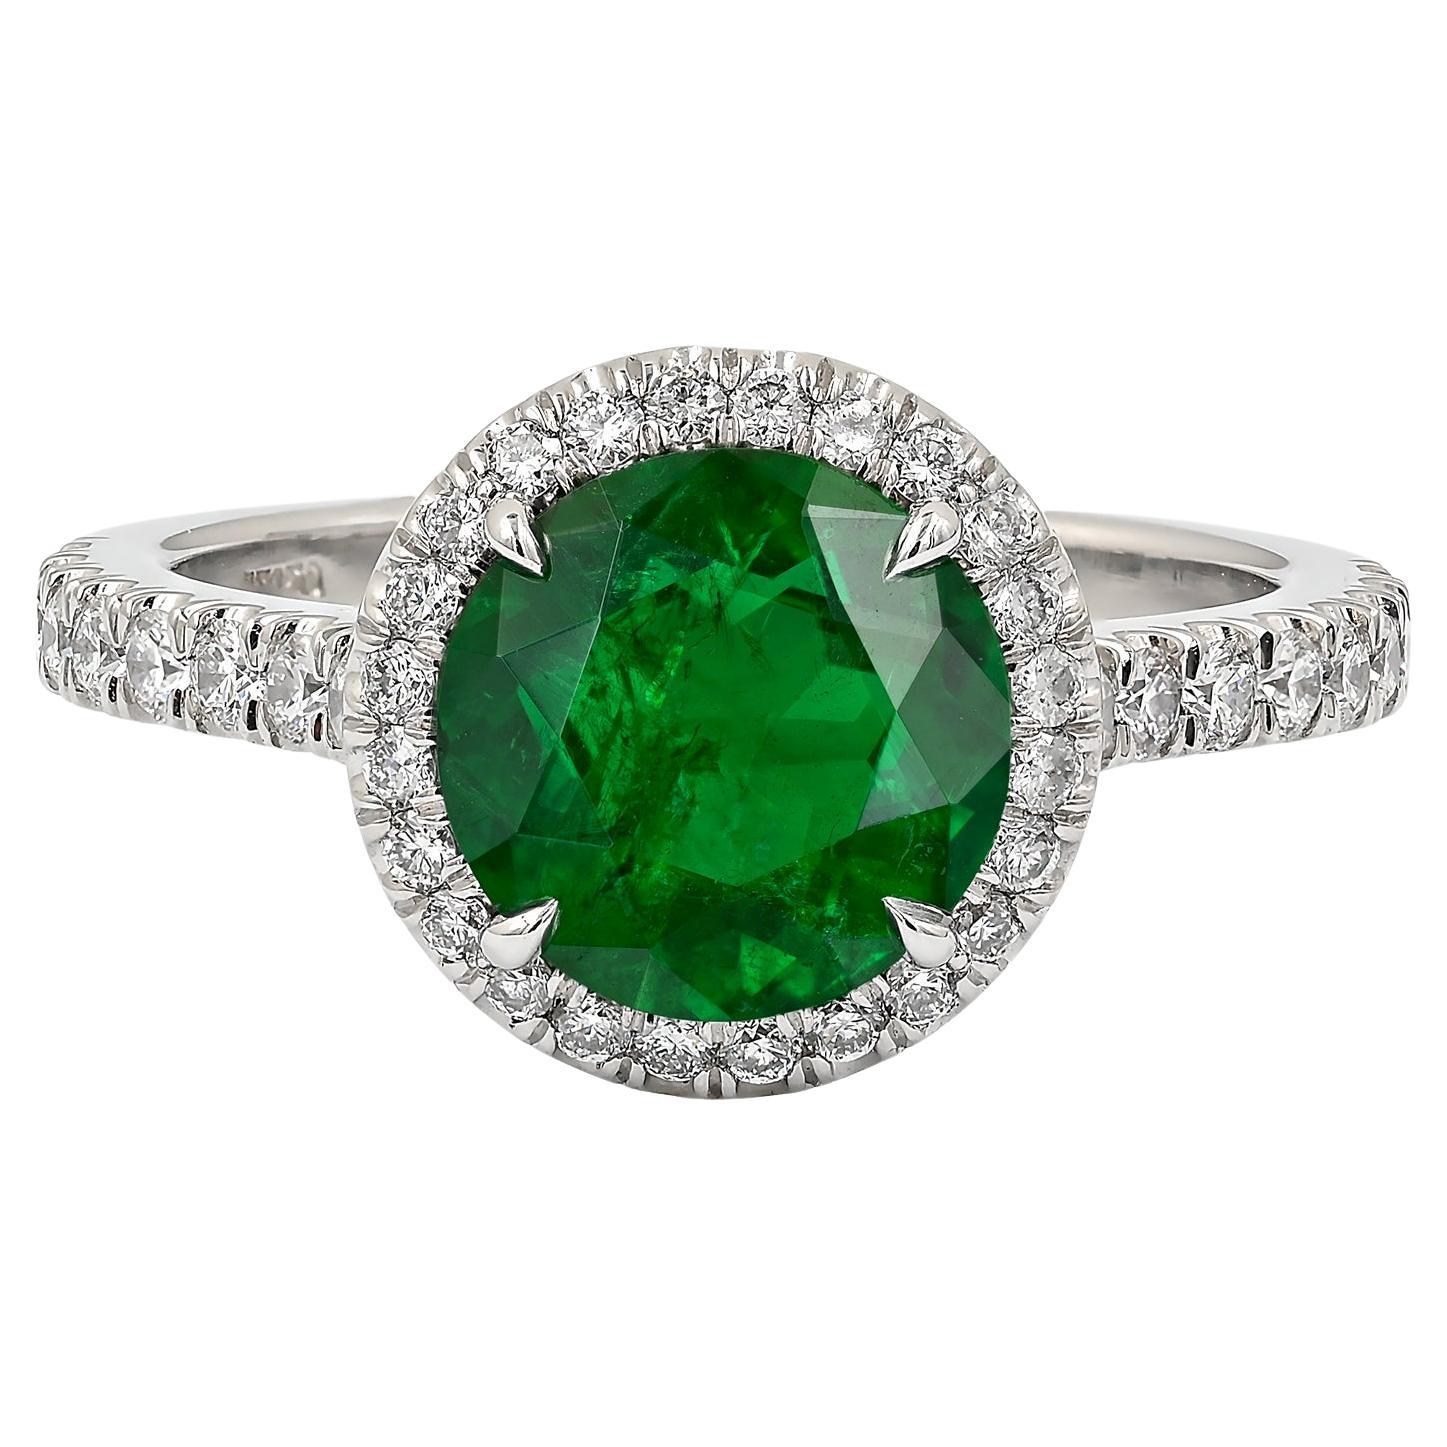 Spectra Fine Jewelry GRS Certified 1.95 Carat Emerald Diamond Cocktail Ring For Sale